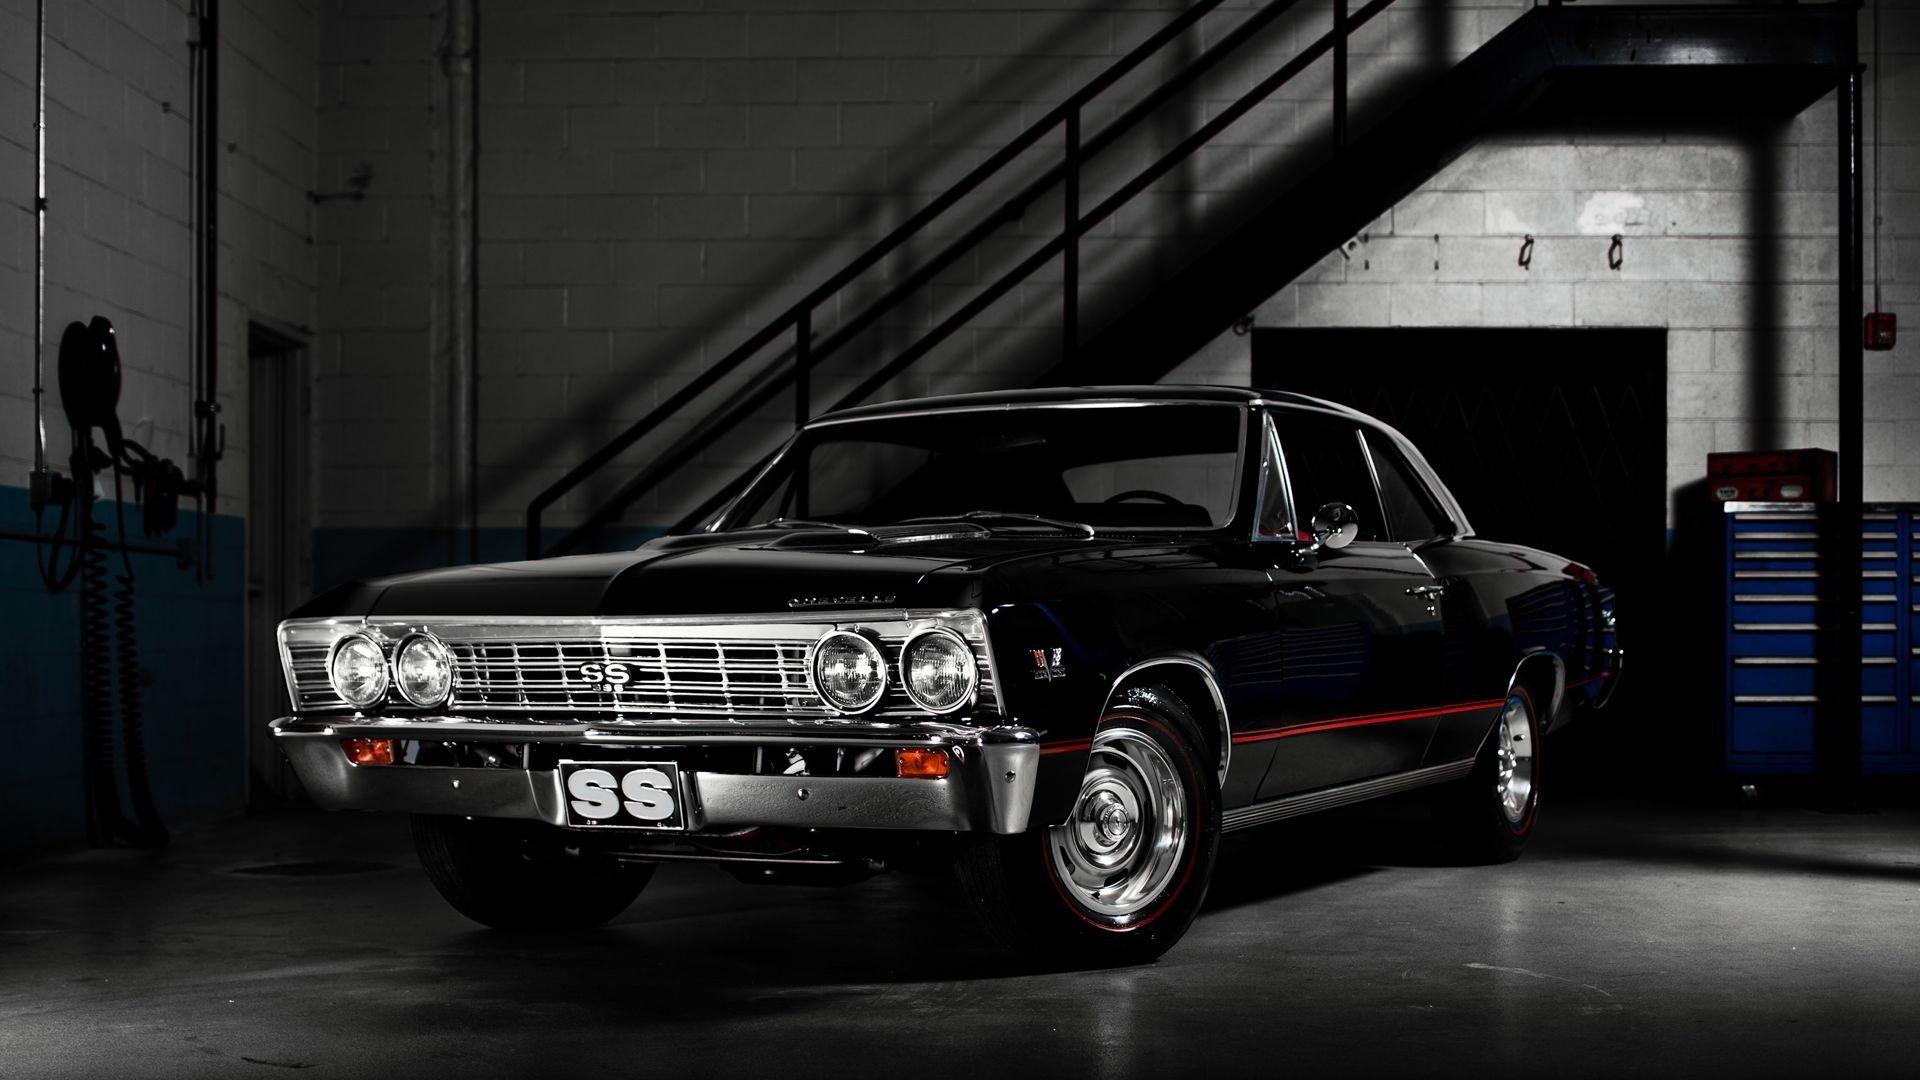 Widescreen Of American Cars Black Chevelle Chevrolet Ss Classic